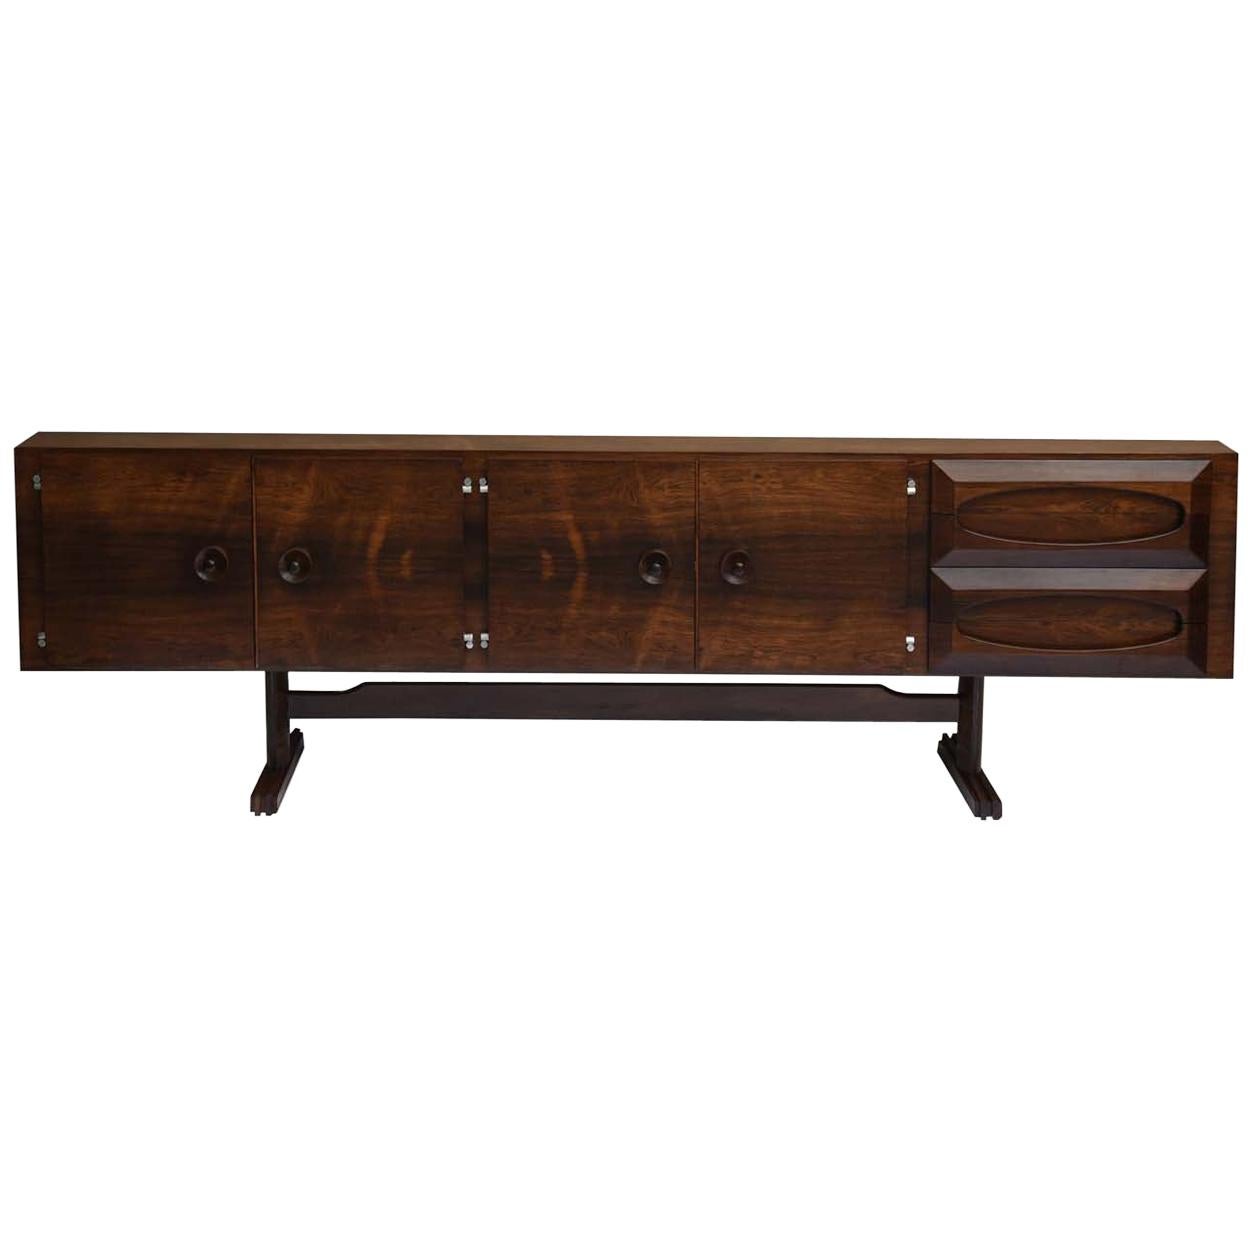 Novo Rumo Midcentury Brazilian Buffet with Rosewood Structure, 1960s